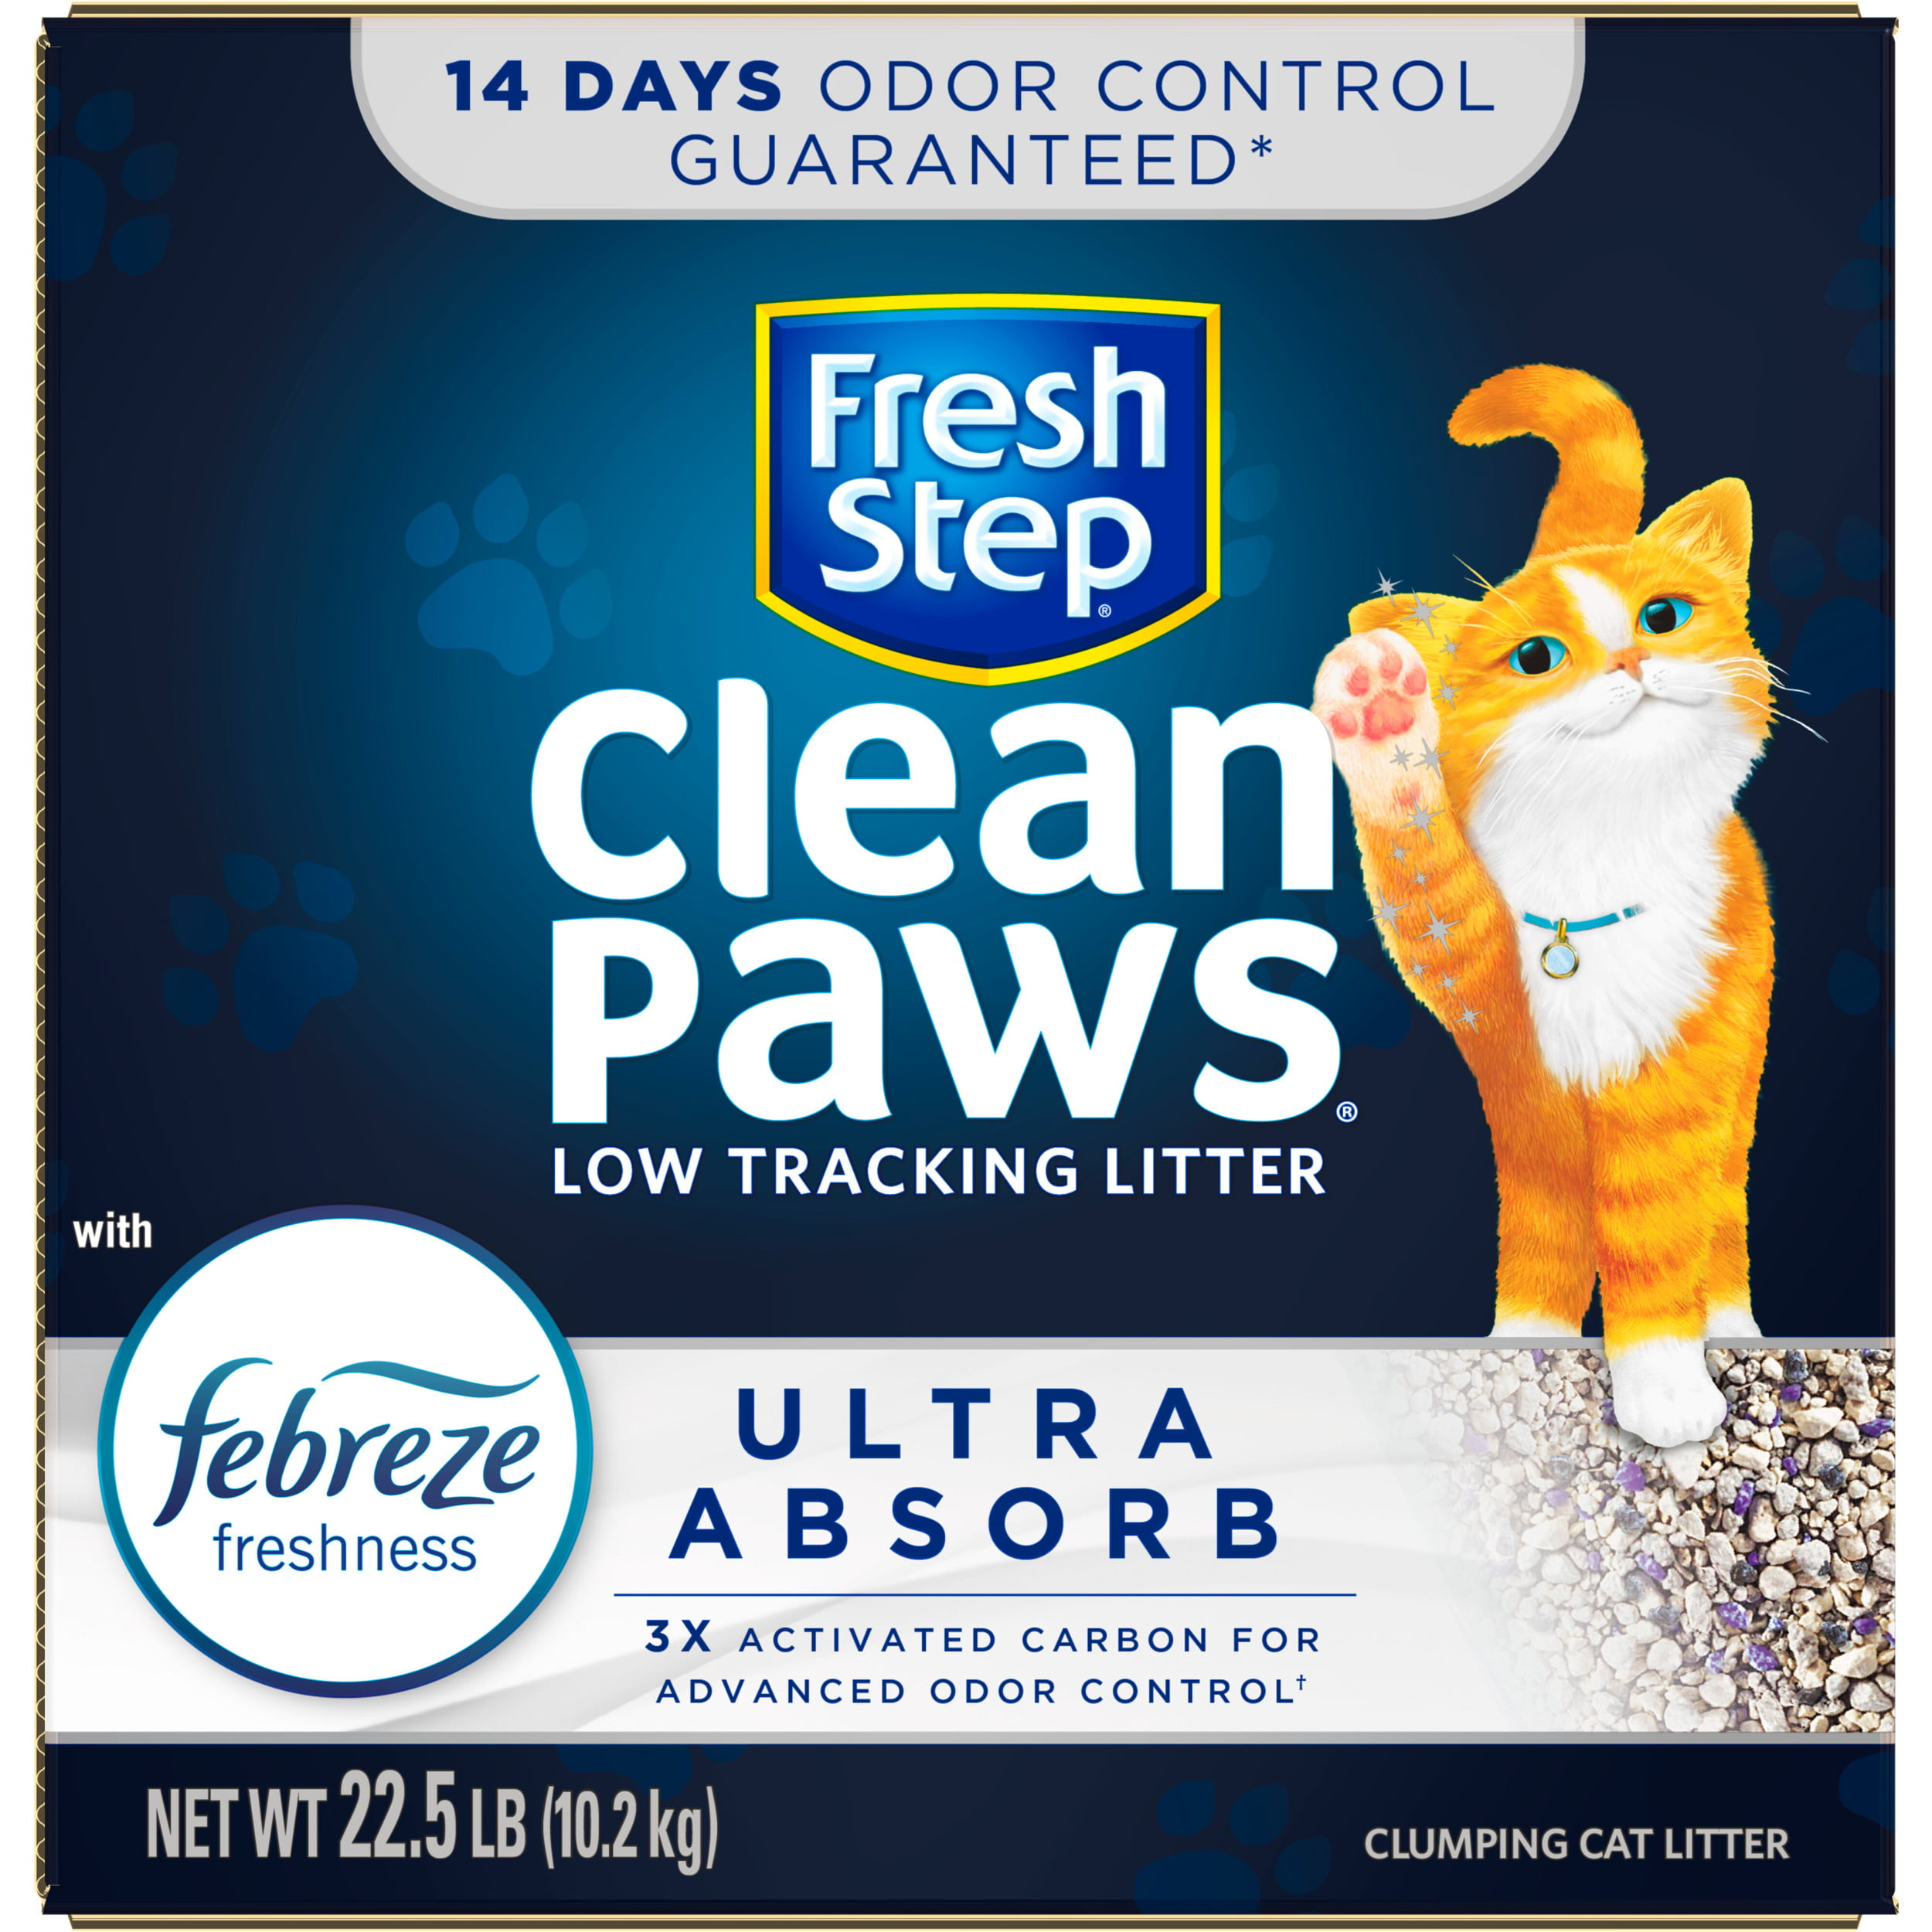 Clean Paws® Multi-Cat Scented Litter with the power of Febreze